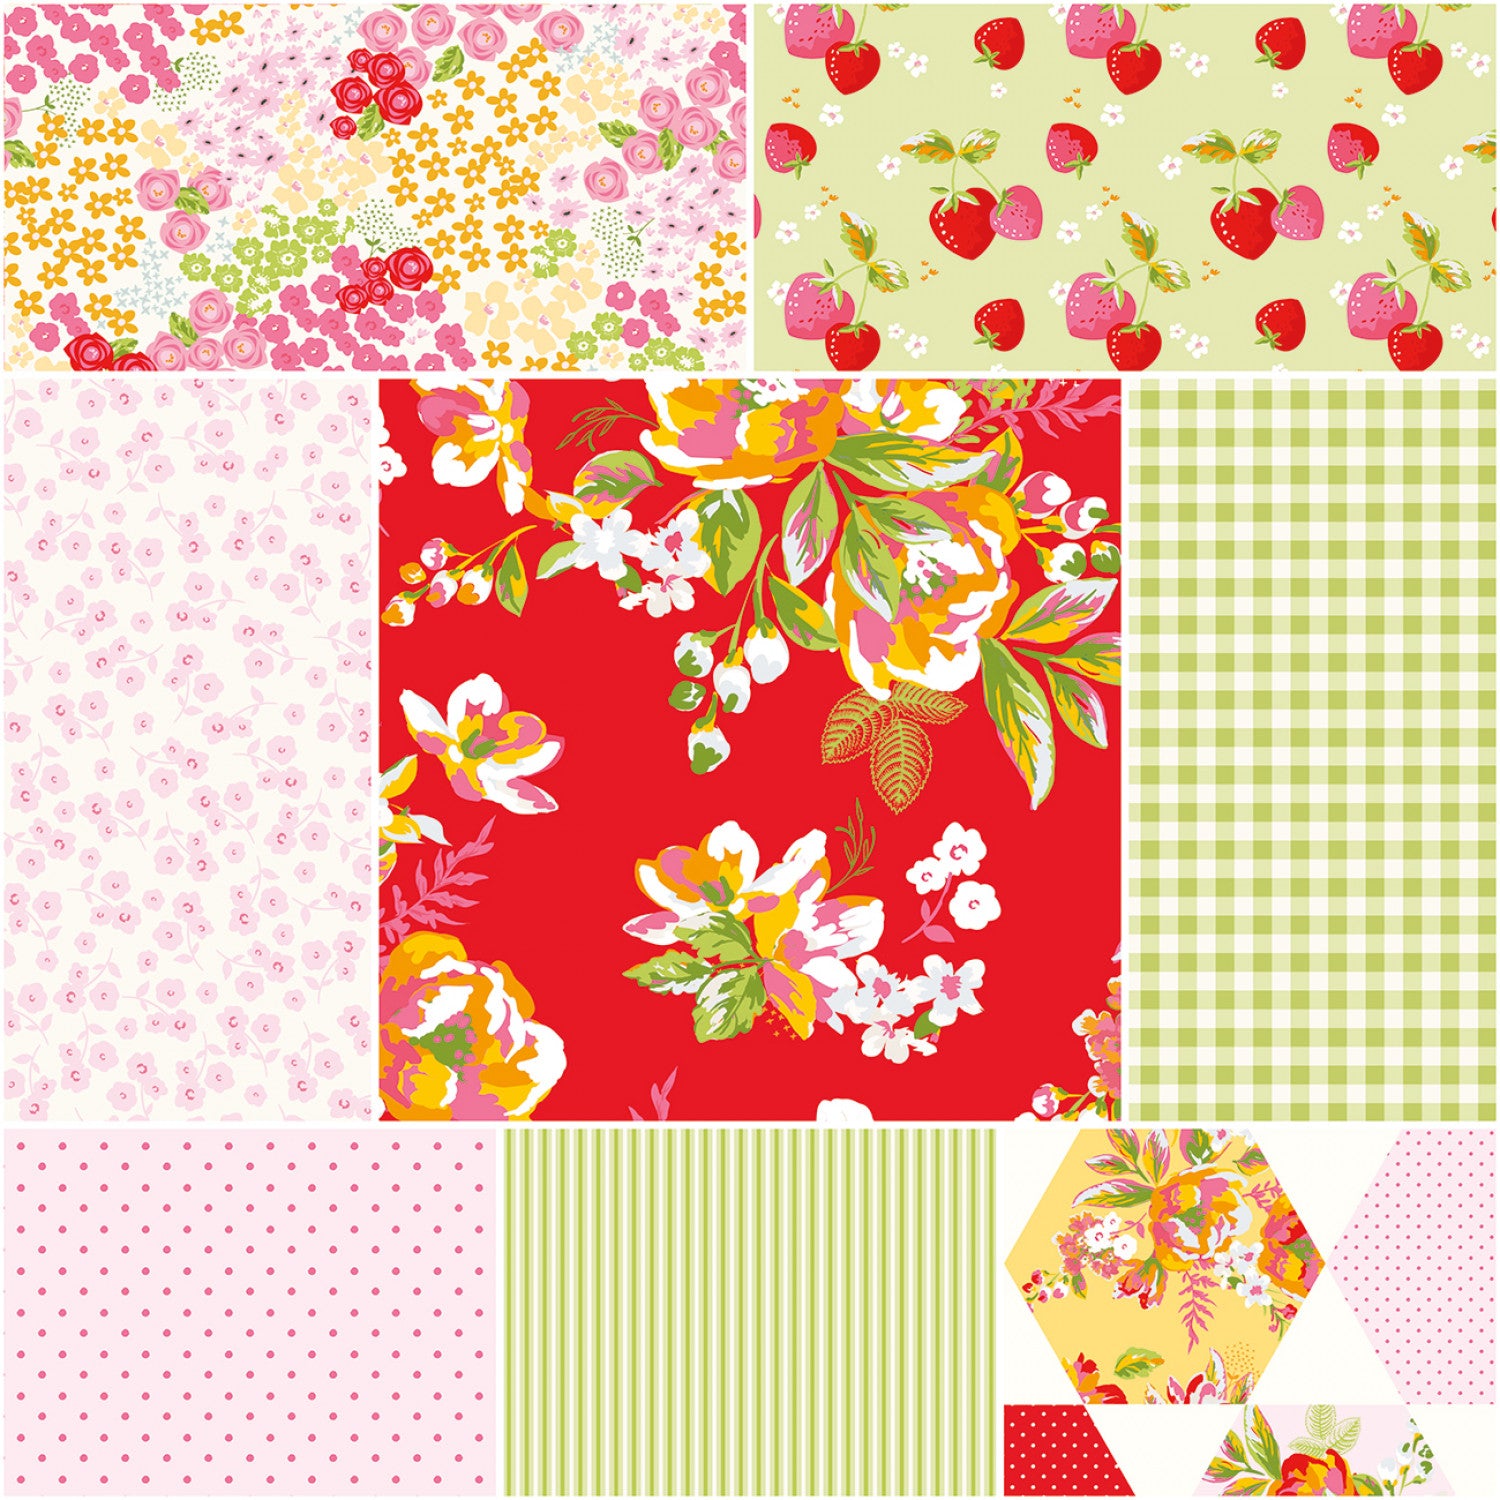 Picnic Florals 1-Yard Bundle Red by My Mind's Eye for Riley Blake (8pcs)